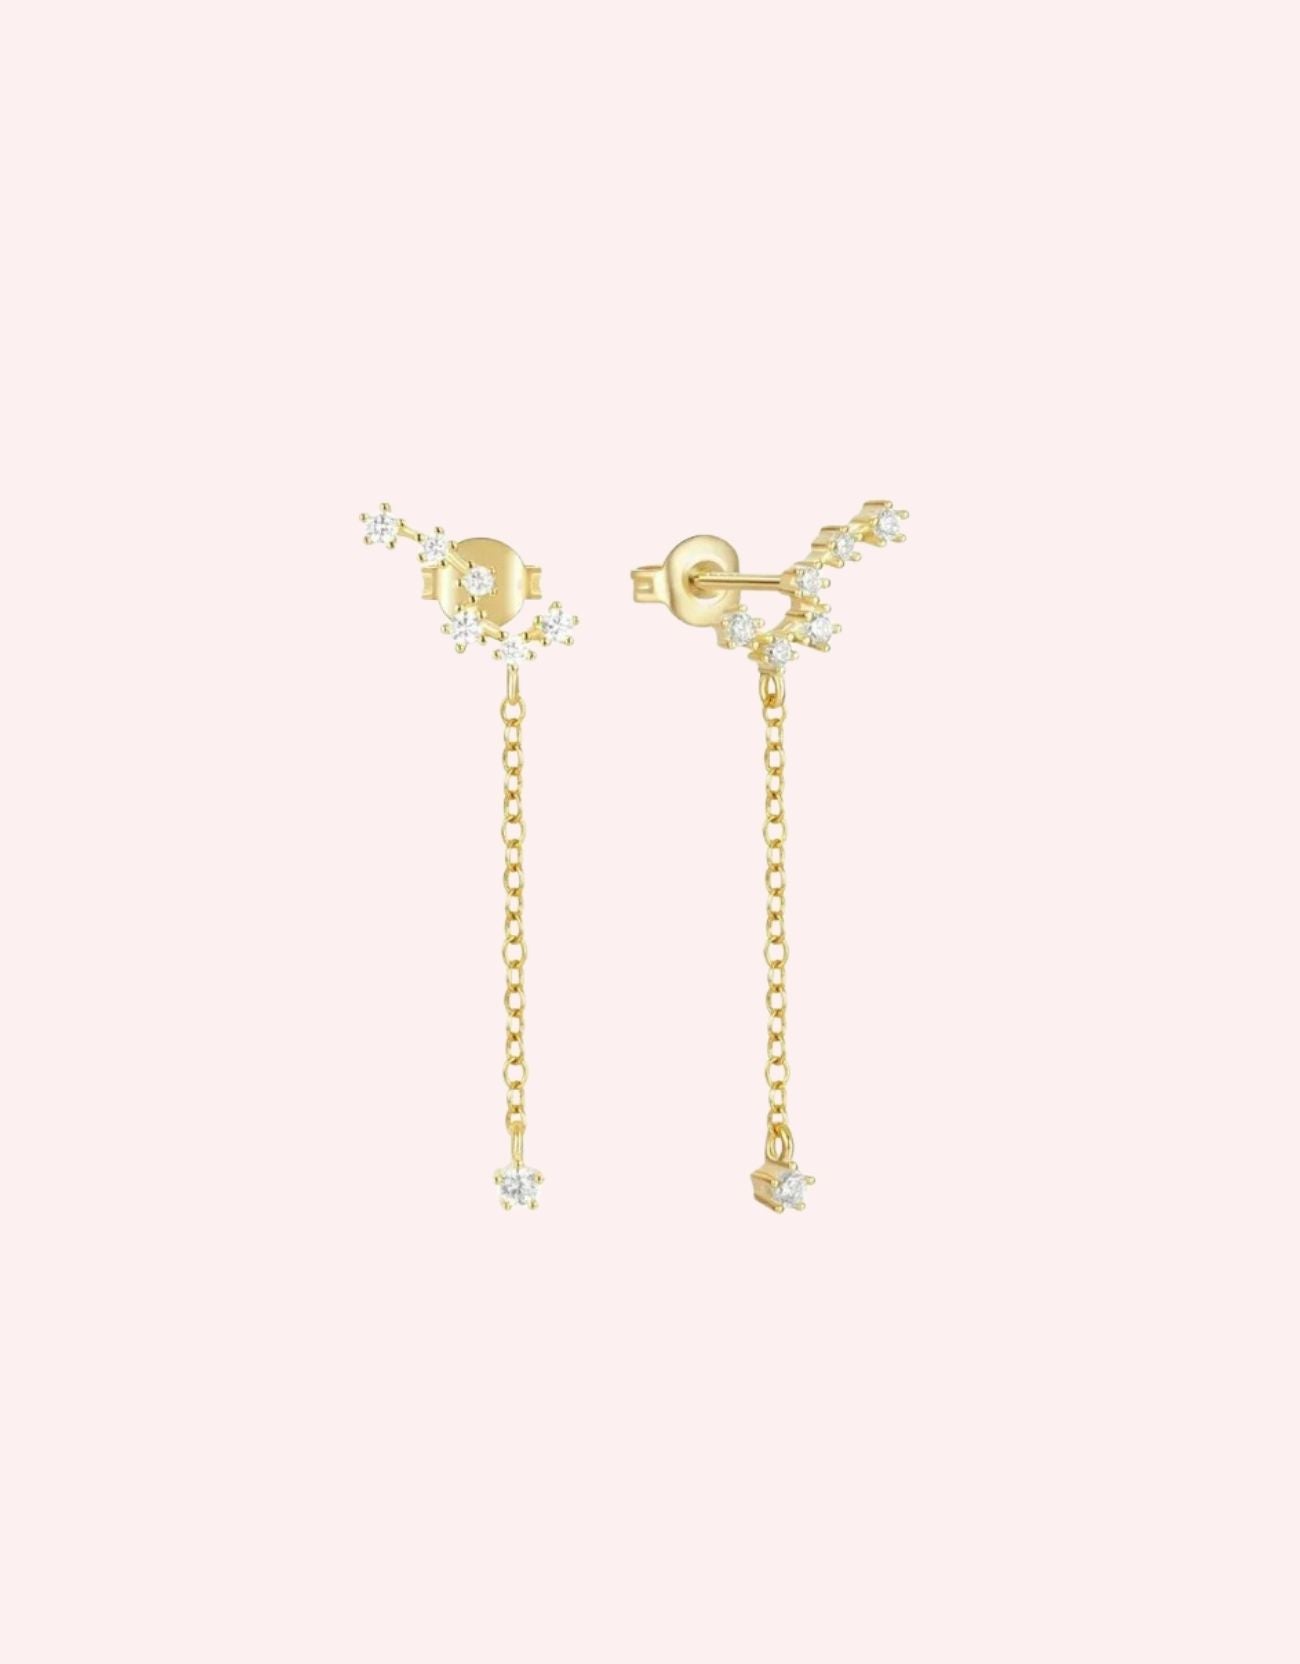 Gorgeous crystal stud earrings crafted from gold-plated sterling silver, adorned with sparkling gemstones for an elegant touch. These timeless studs feature secure closures and high-quality materials, perfect for adding a touch of luxury to any ensemble